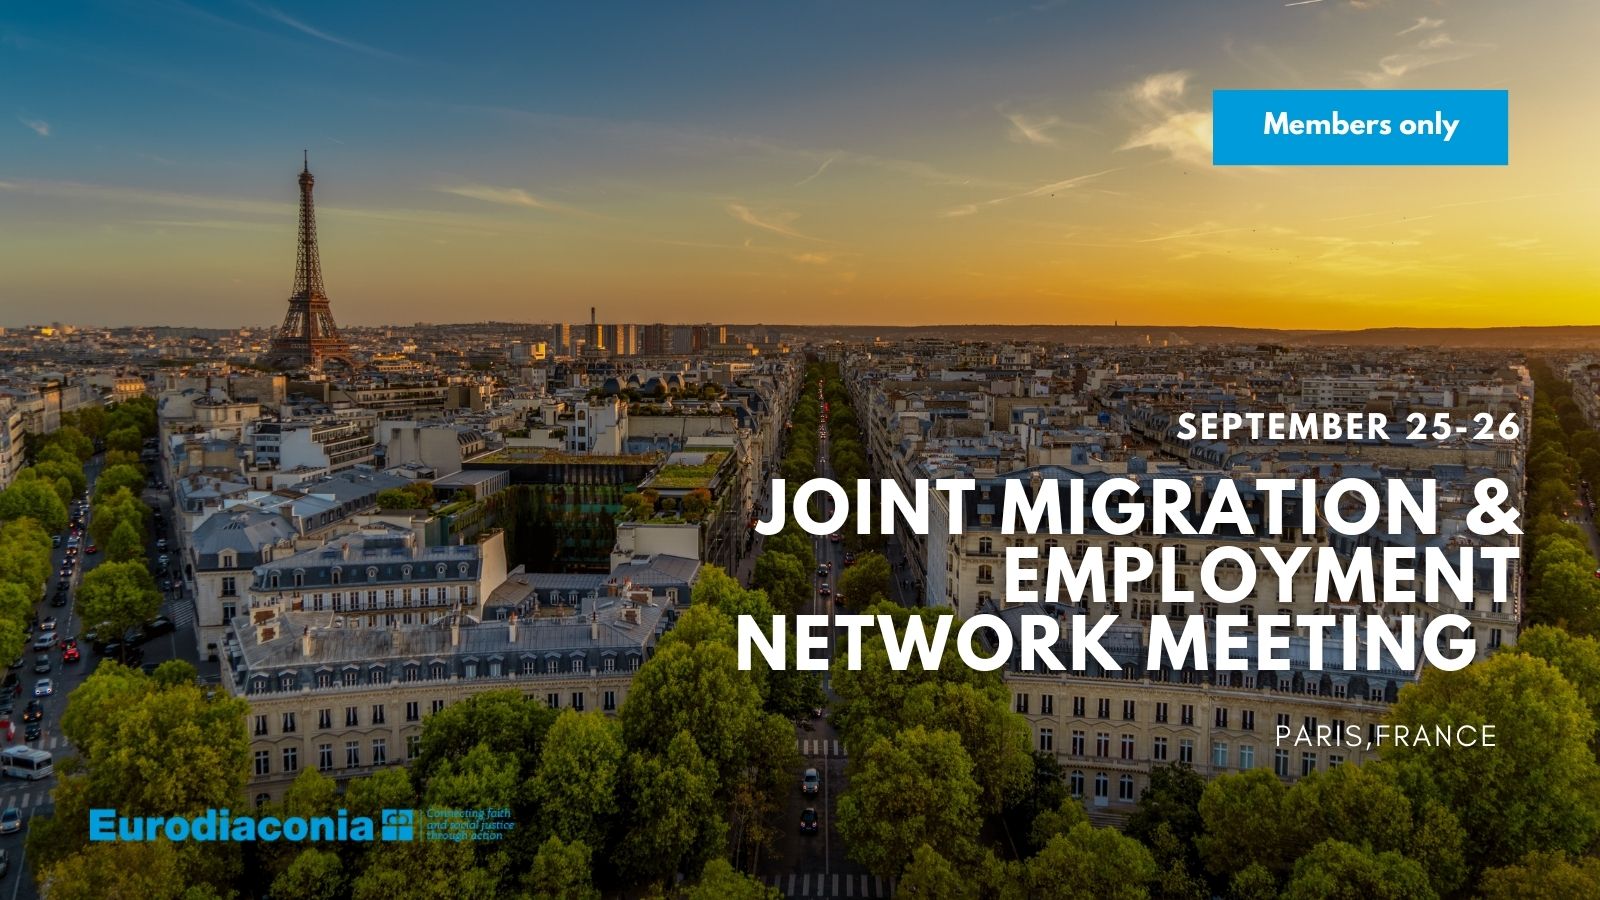 Joint Migration & Employment Network Meeting | Members only event Paris, France